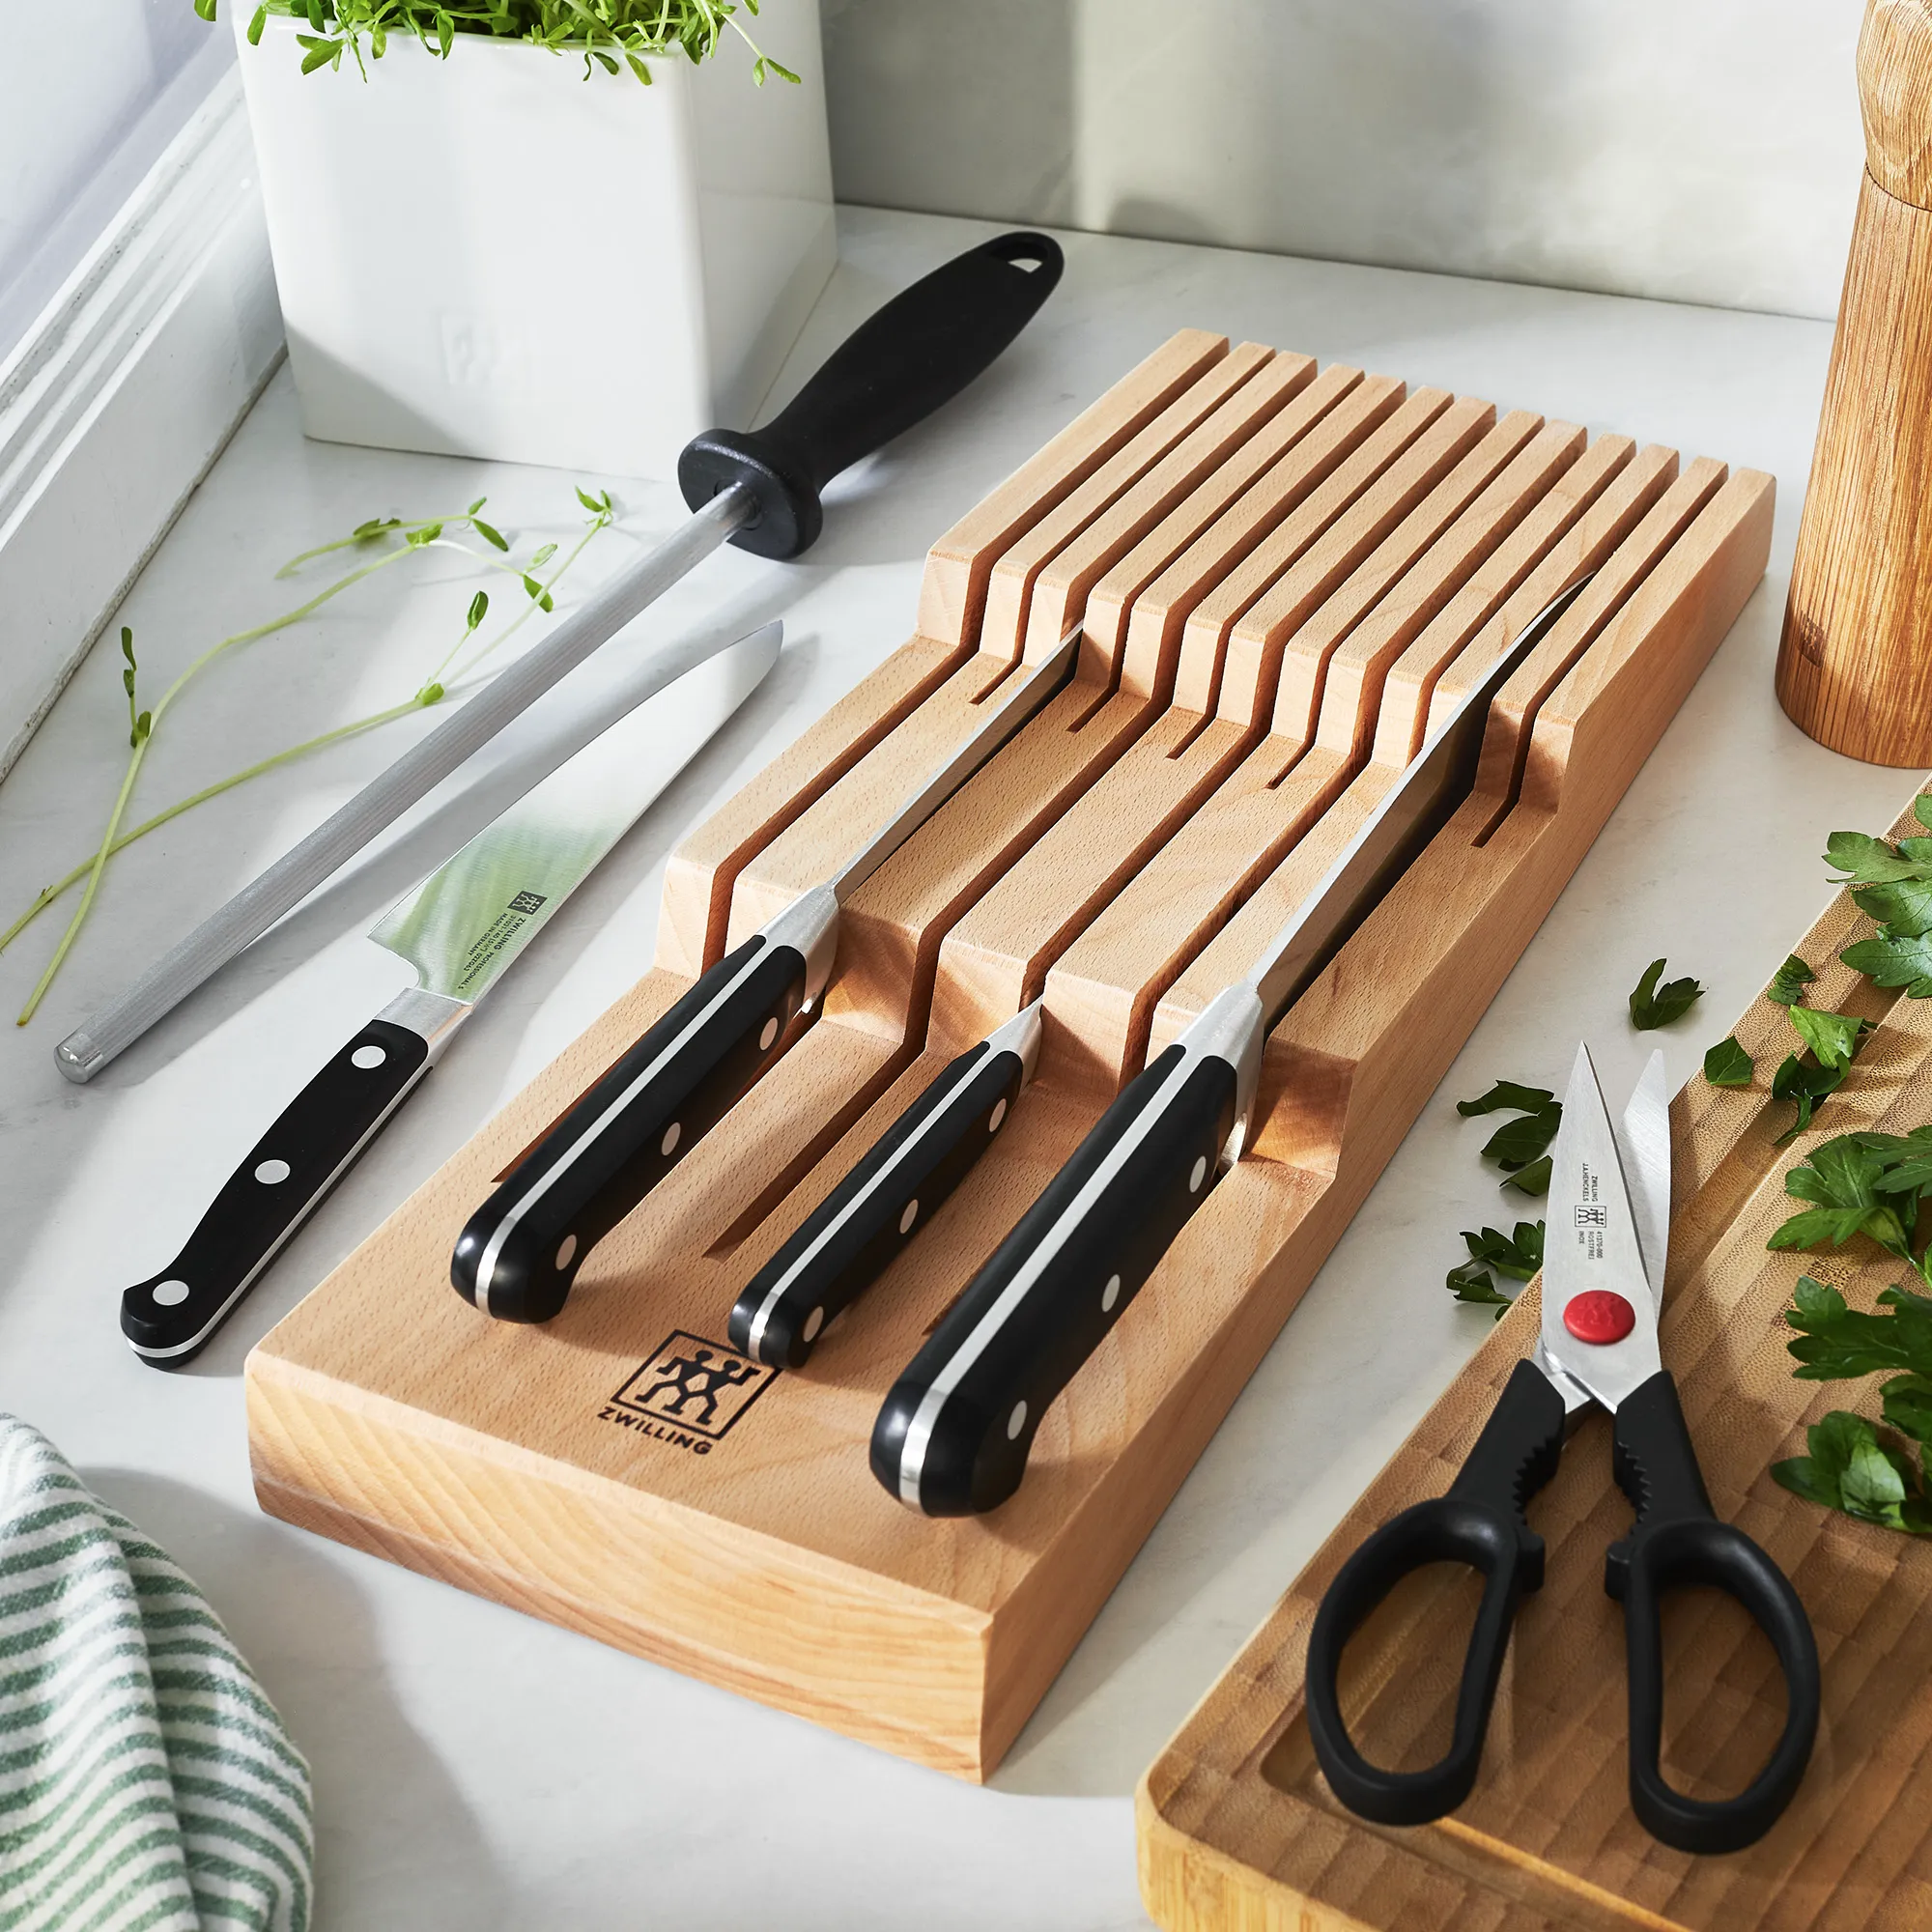 https://www.homethreads.com/files/zwilling/35684-307-zwilling-professional-s-7-pc-knife-set-with-in-drawer-knife-tray-2.webp